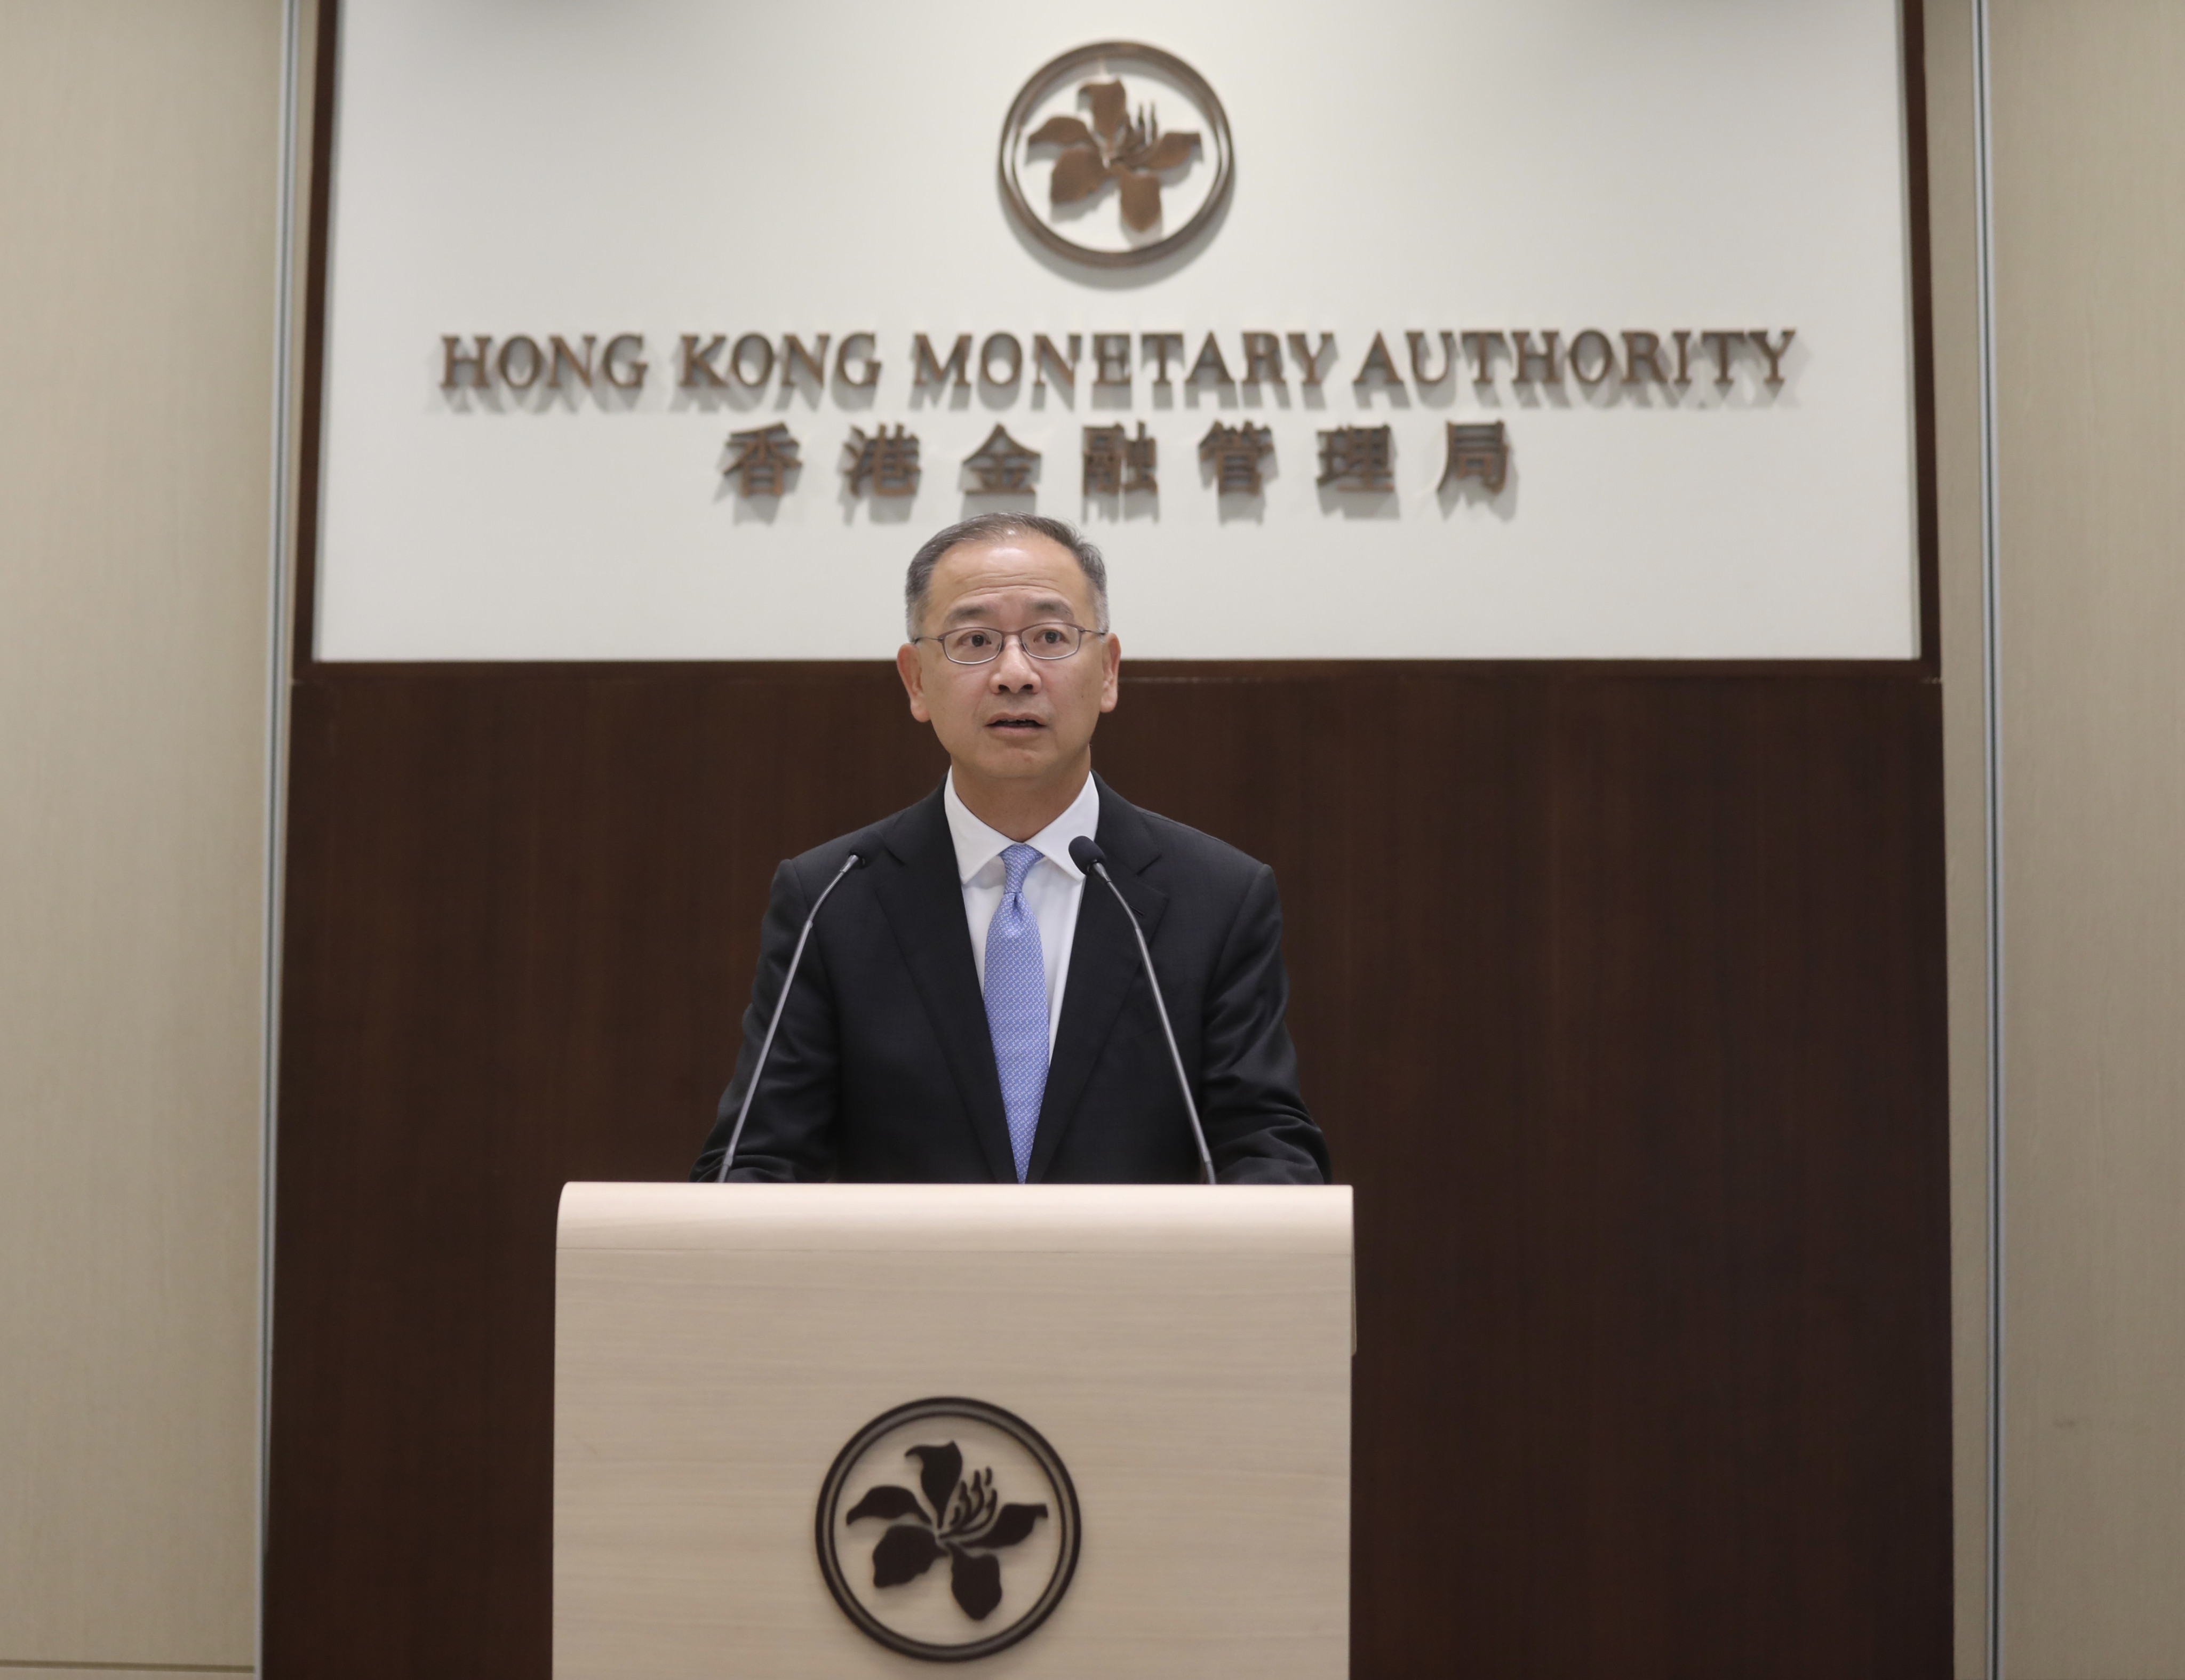 HKMA chief executive Eddie Yue Wai-man speaks to the media on July 1 in Hong Kong’s Central district. The Hong Kong Monetary Authority manages one of the world’s largest reserves. Photo: Xiaomei Chen